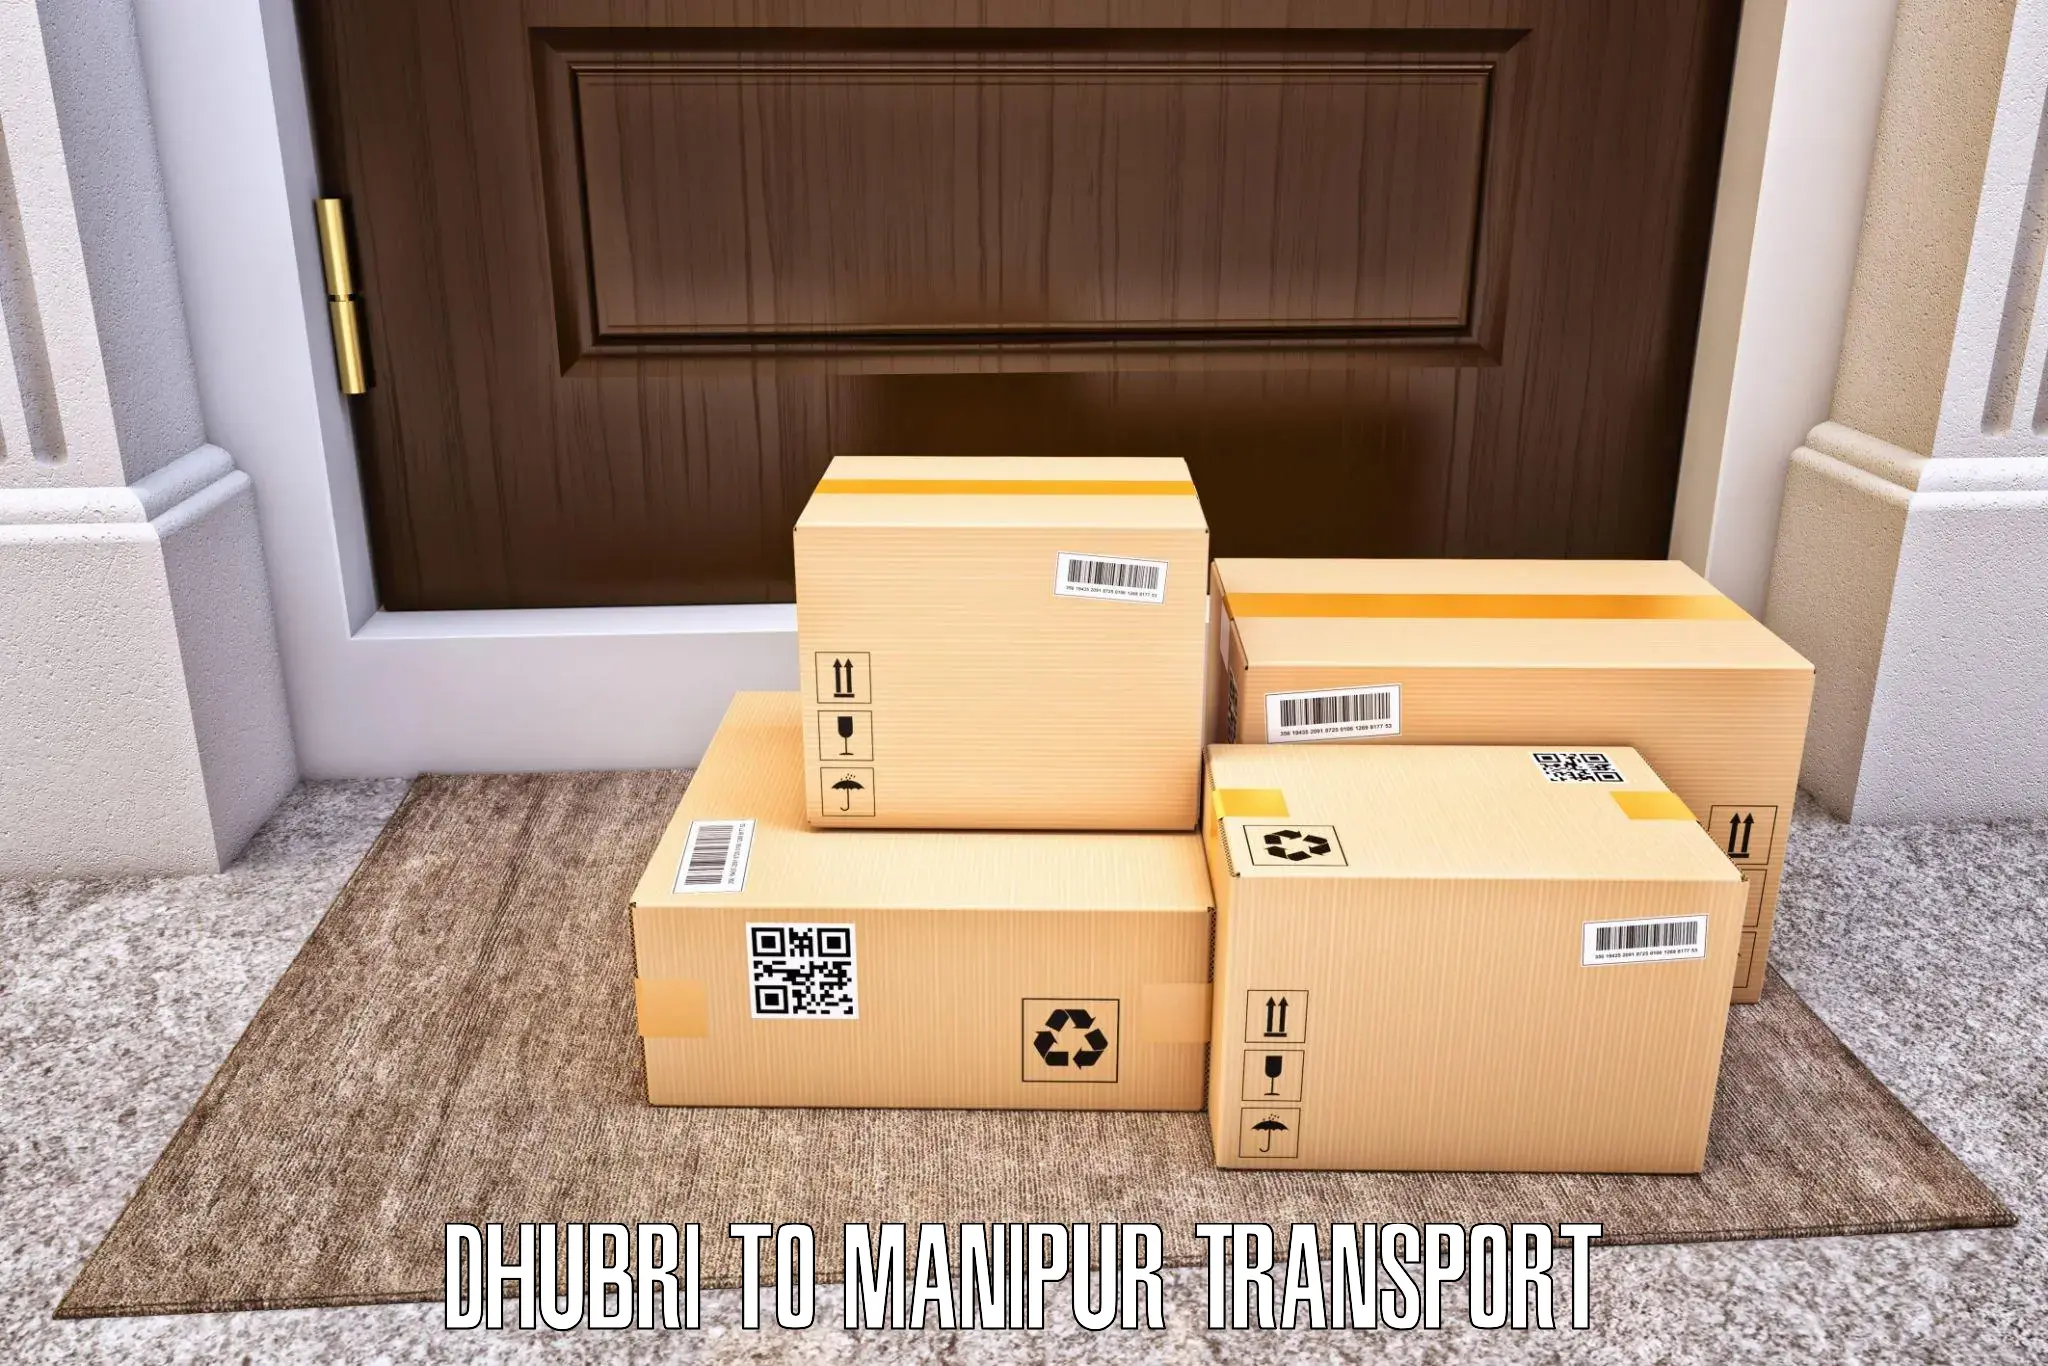 Domestic goods transportation services Dhubri to Imphal